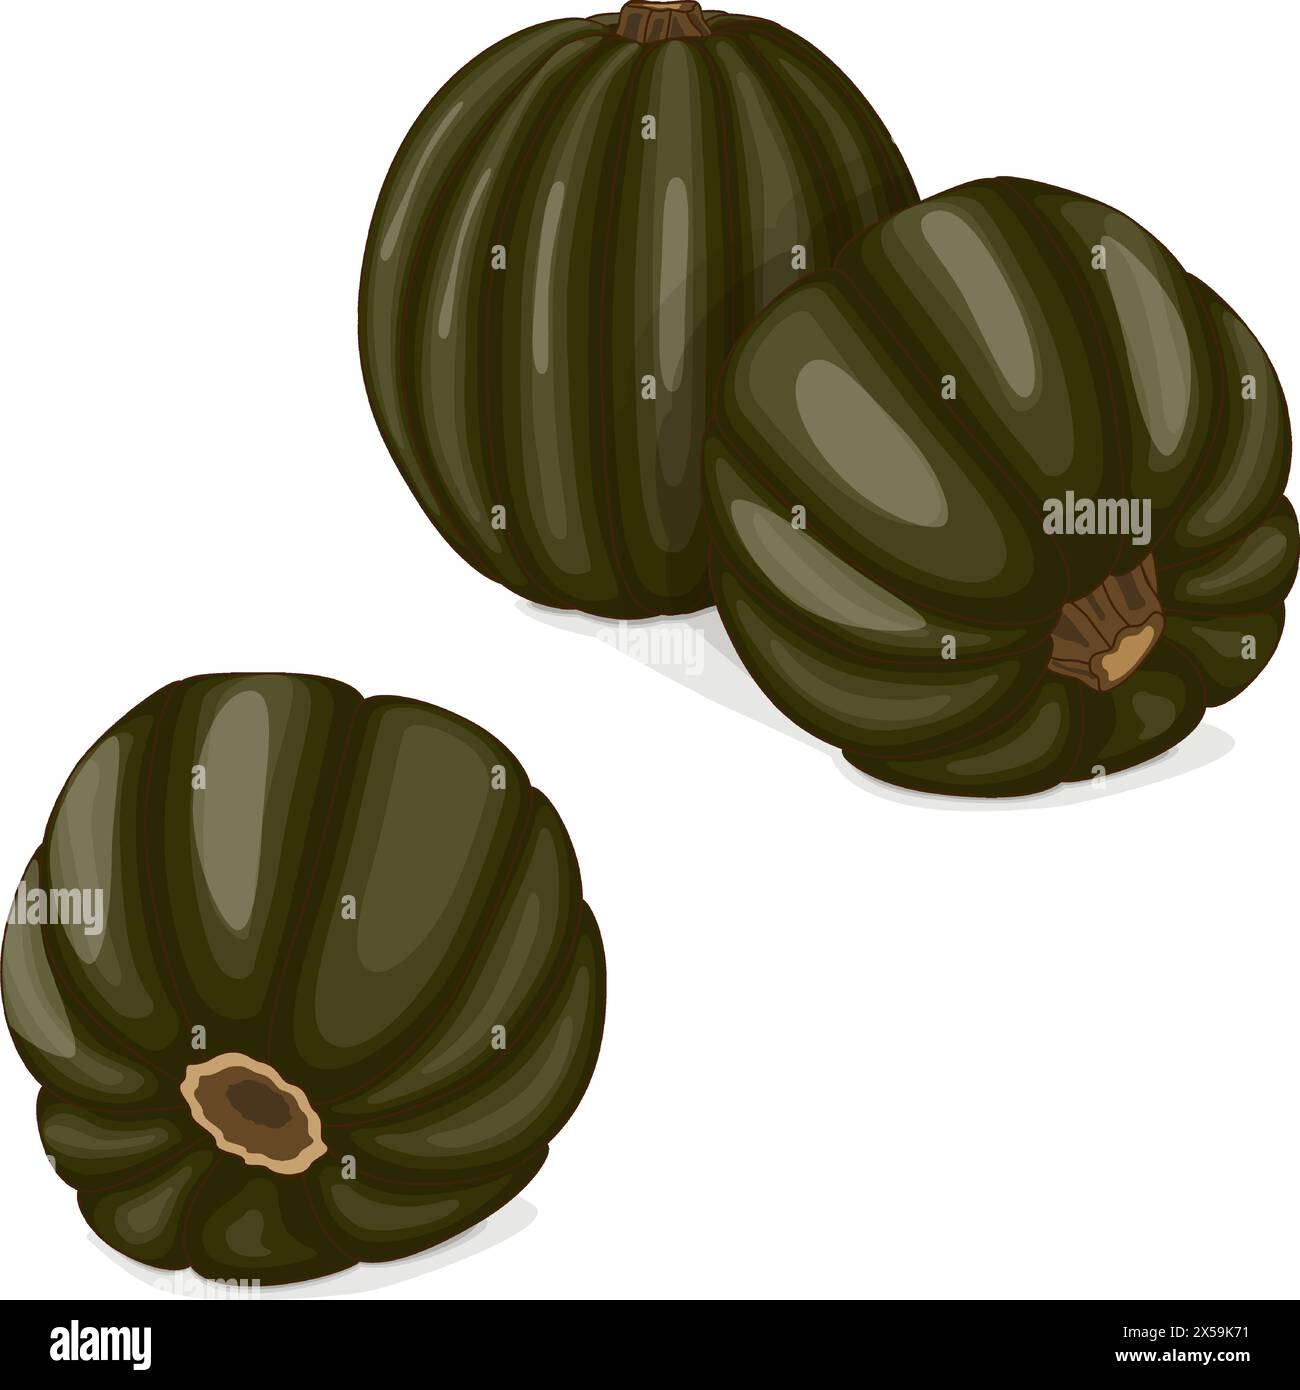 Group of Zapallo Macre Squash. Winter squash. Cucurbita maxima. Fruits and vegetables. Clipart. Isolated vector illustration. Stock Vector